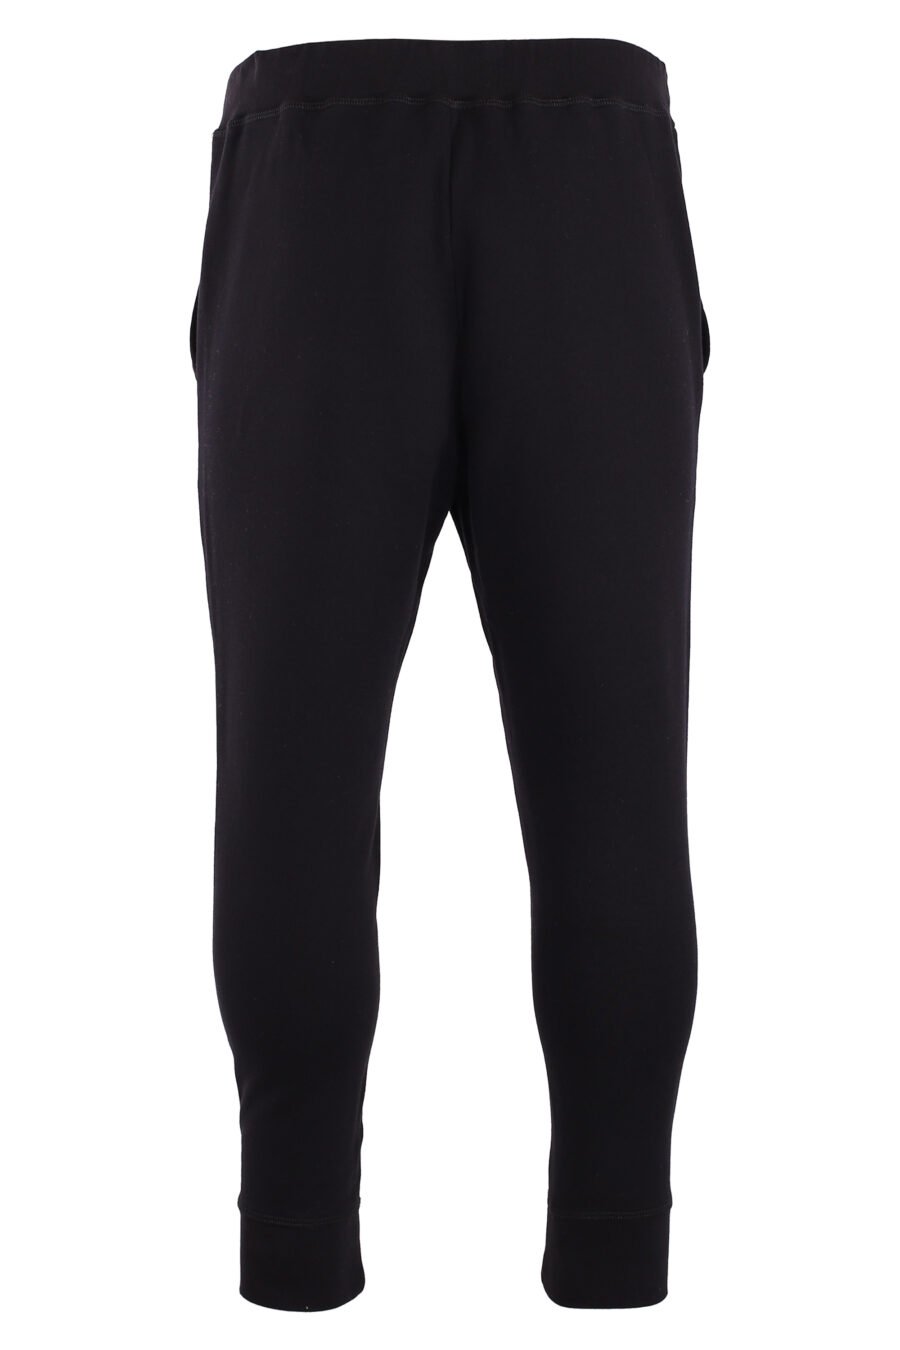 Tracksuit bottoms black "icon ski" with white vertical double logo - IMG 8973